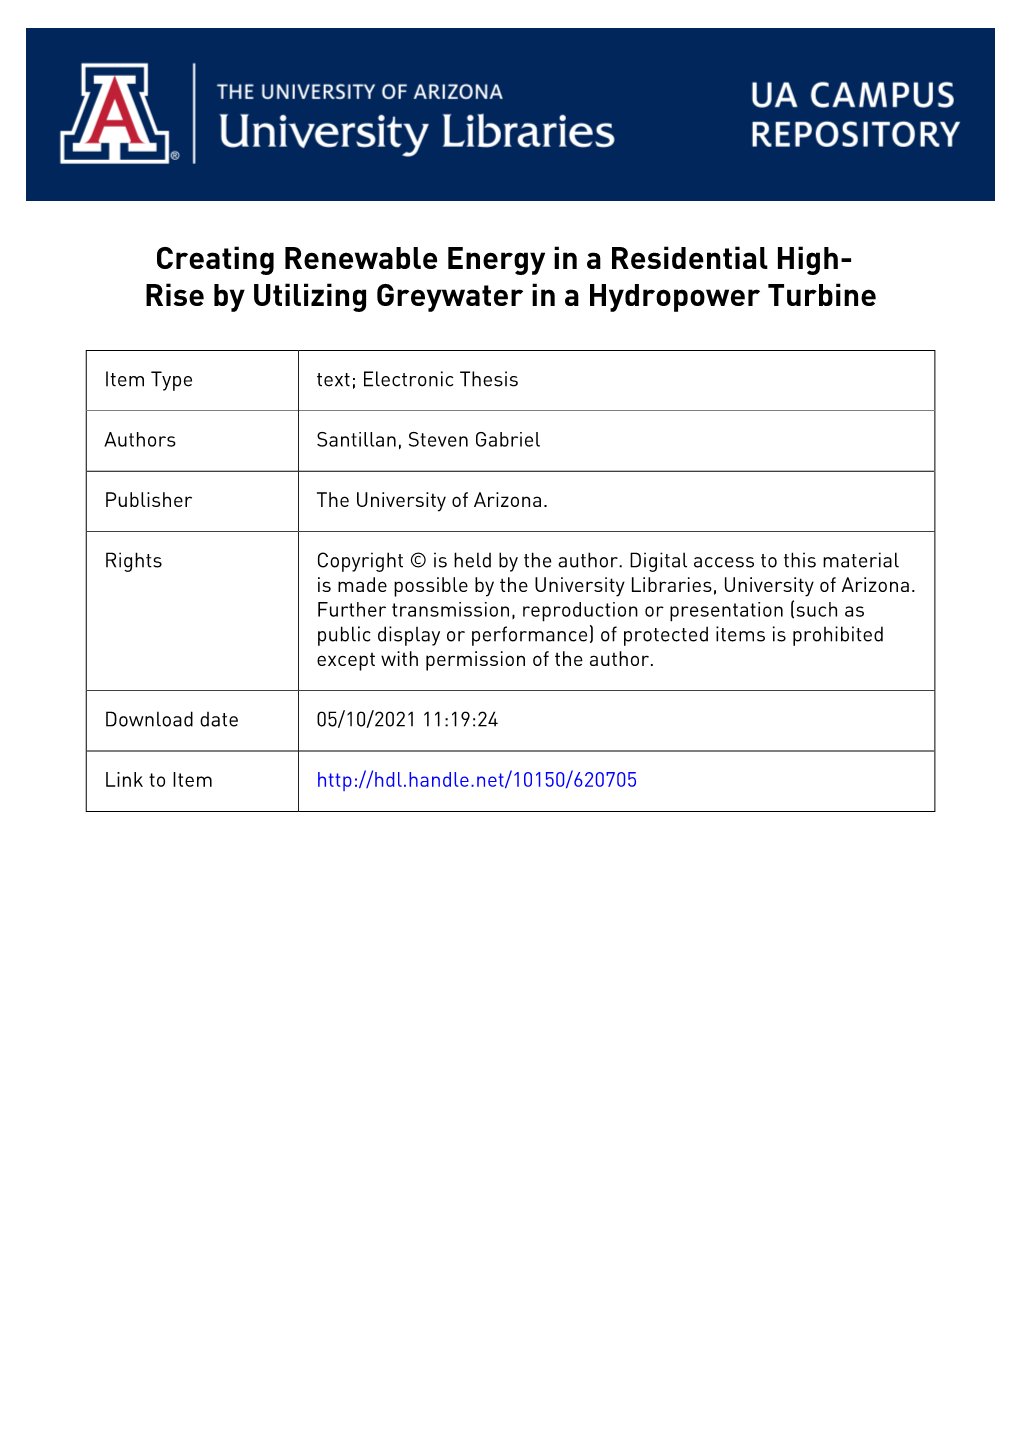 Creating Renewable Energy in a Residential High-Rise by Utilizing Greywater in a Hydropower Turbine